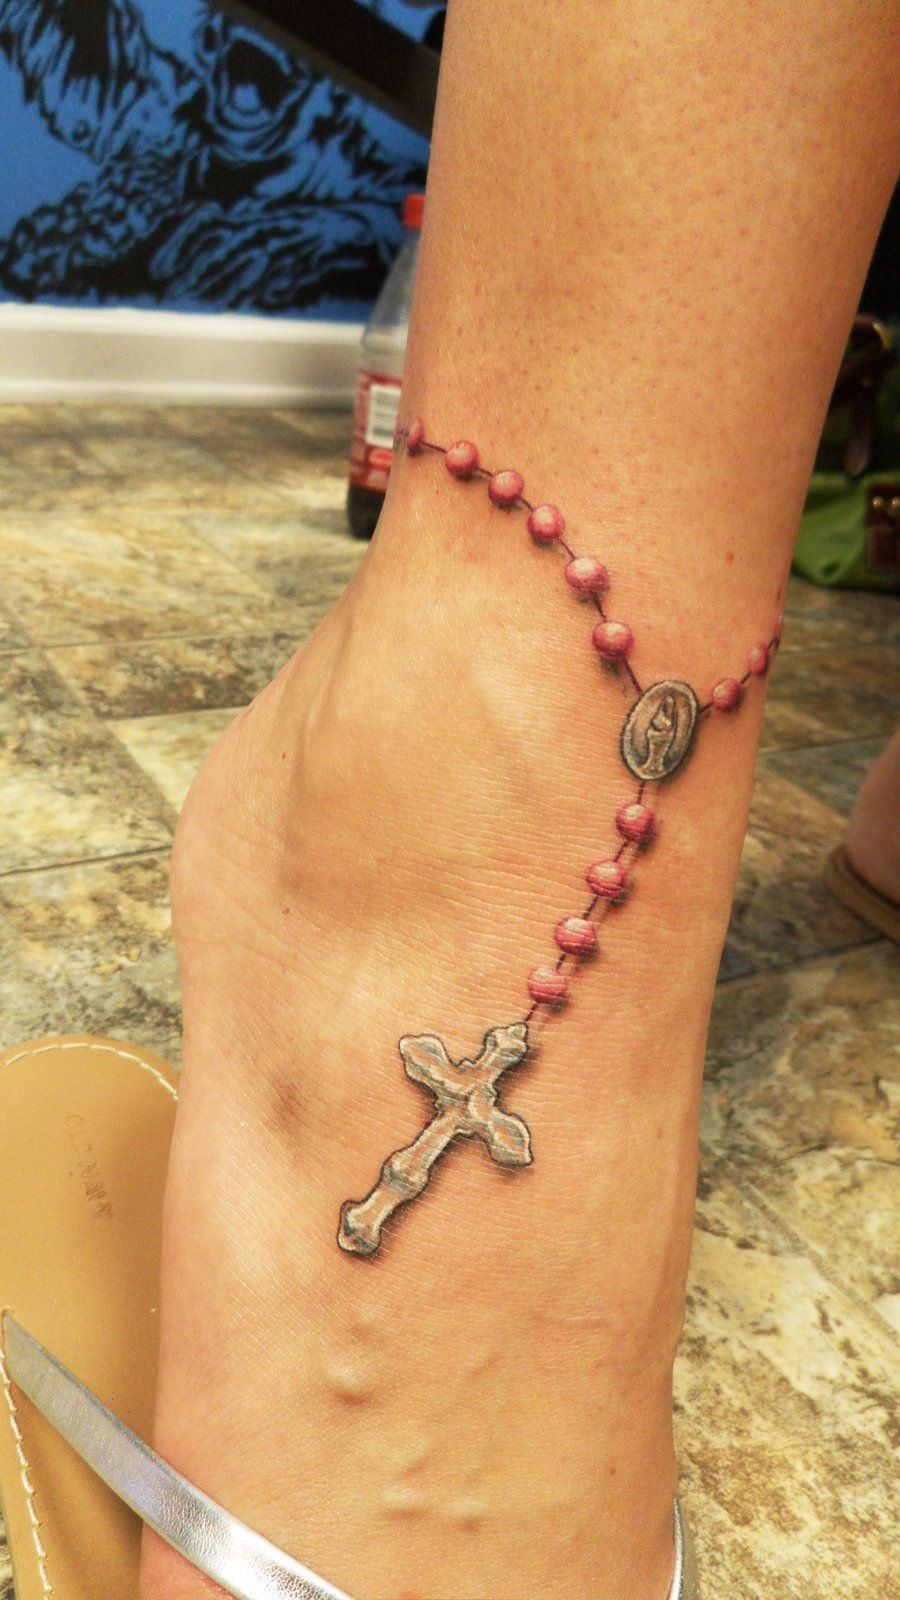 Rosary Tattoo Love The Shadow Looks Just Like The Pink Rosary I in dimensions 900 X 1600